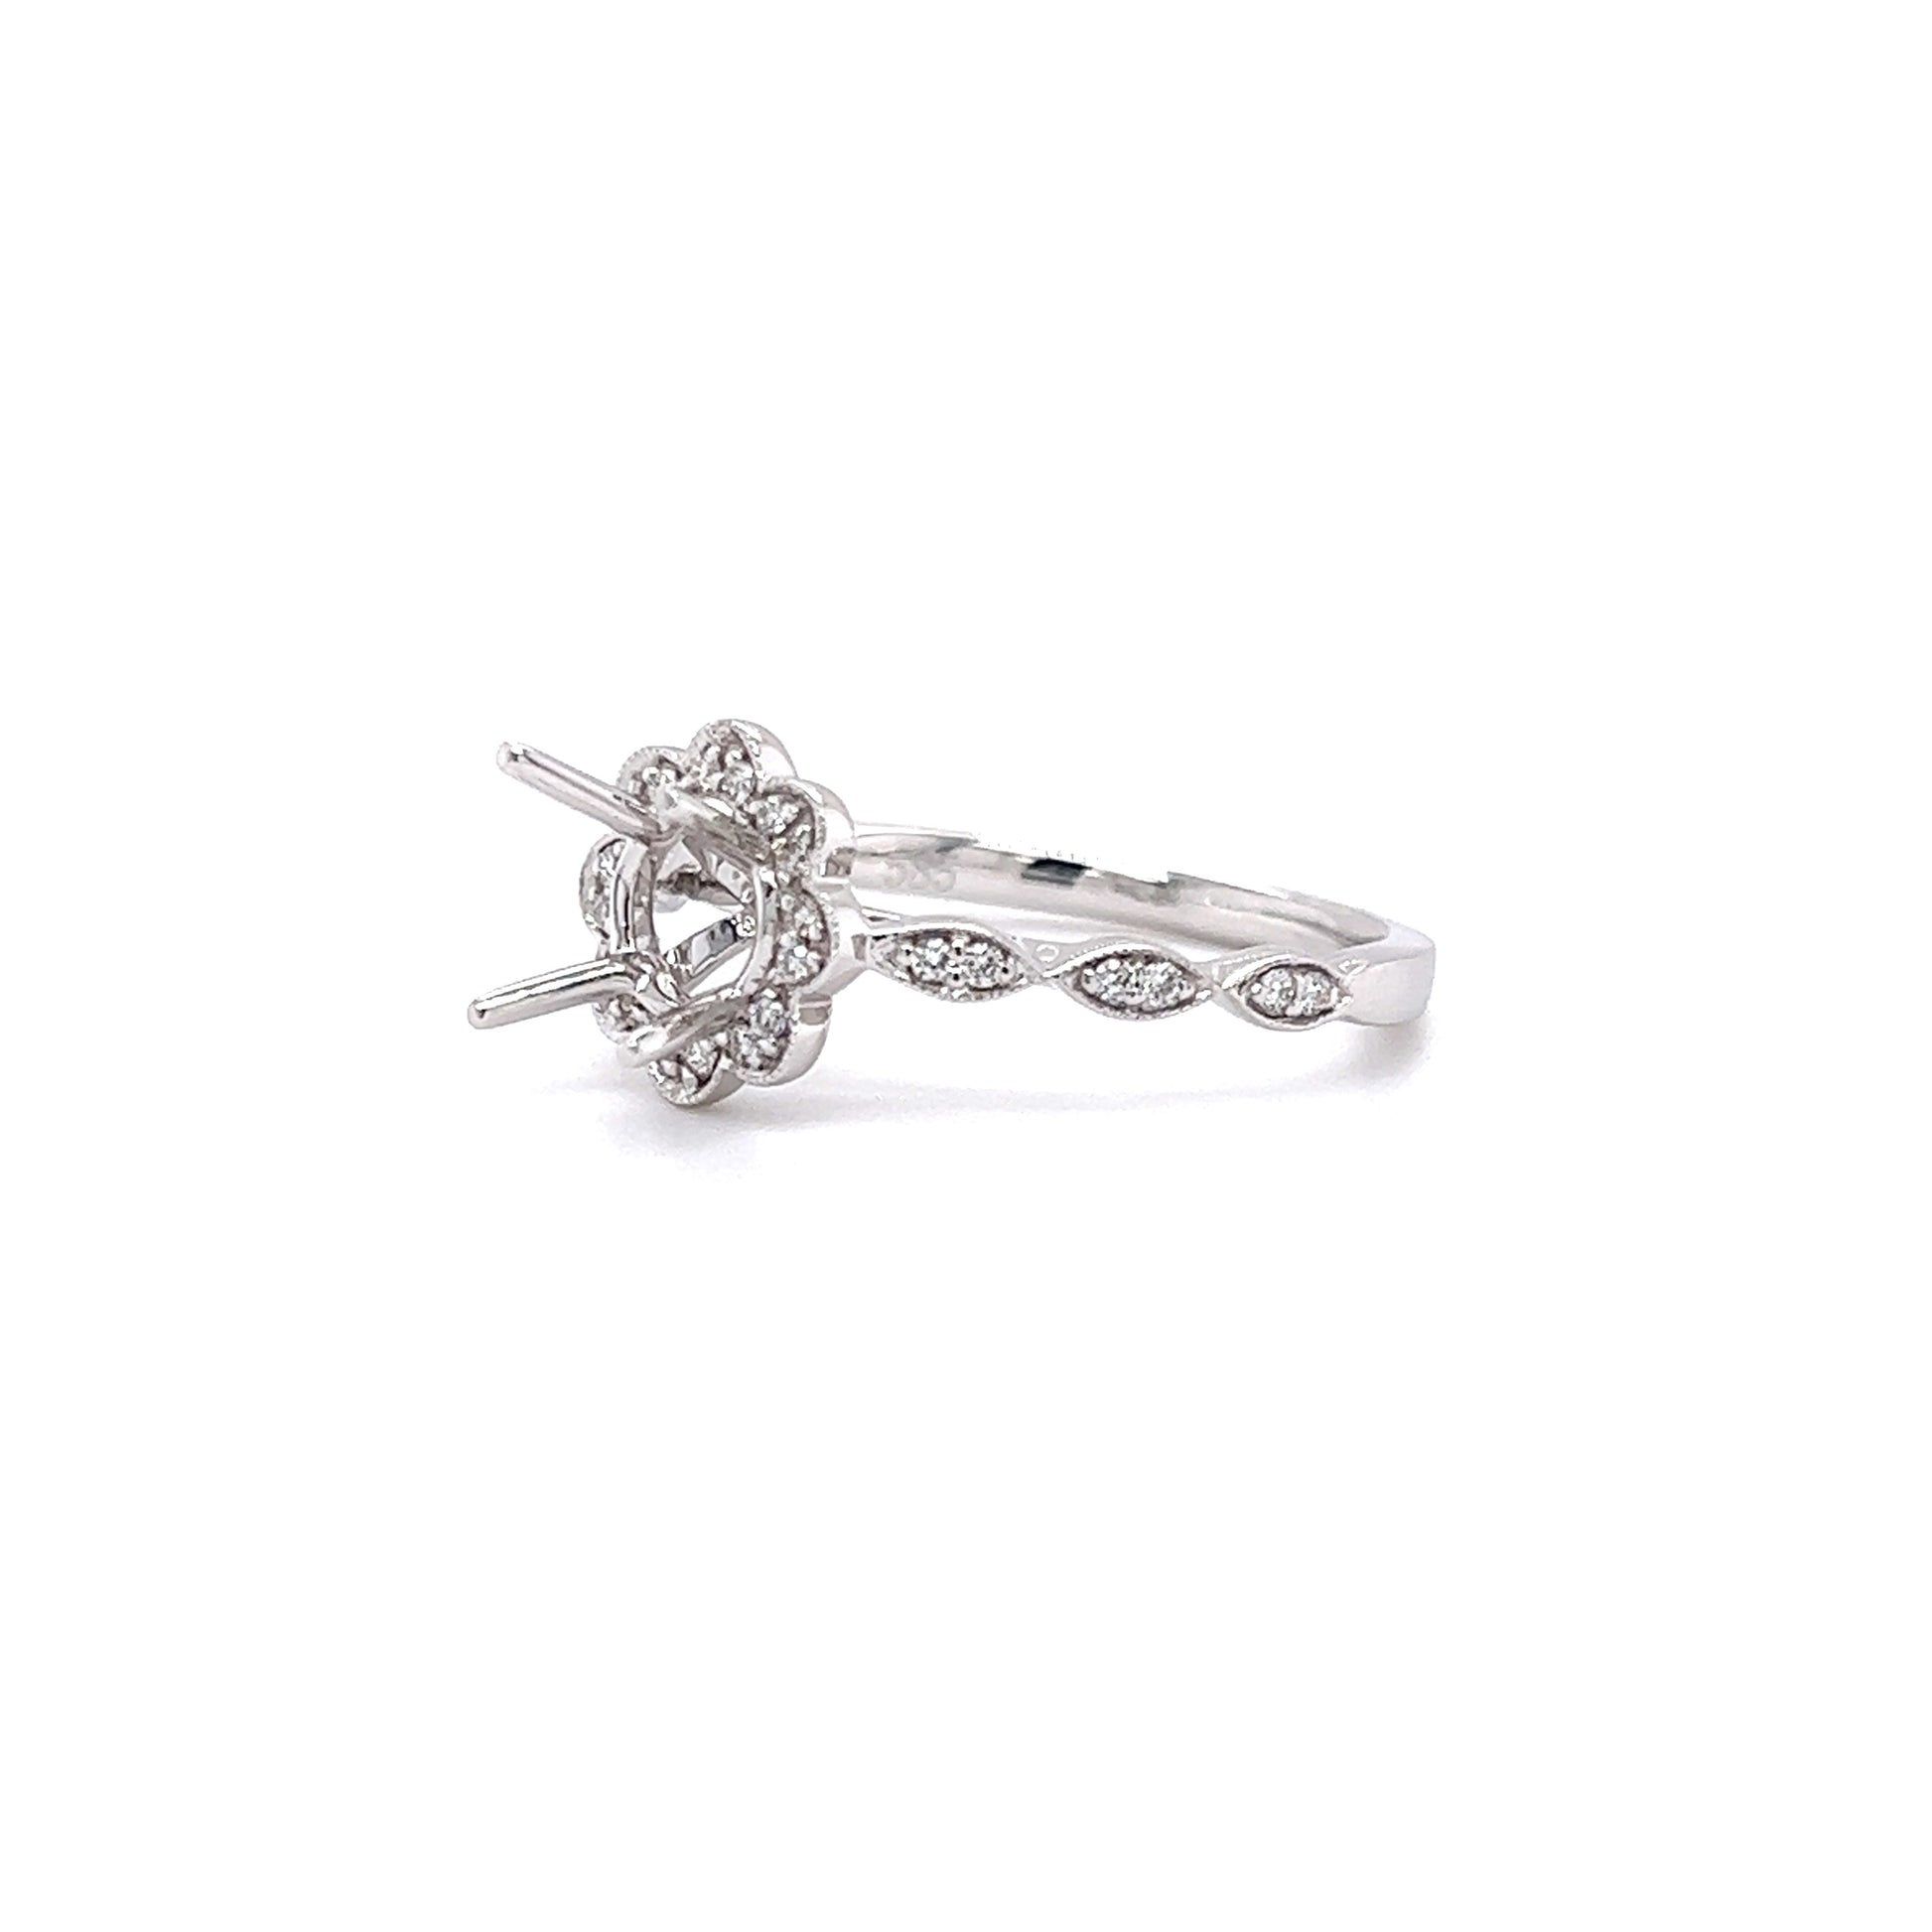 Diamond Ring Setting with Floral Diamond Halo in 14K White Gold Right Side View